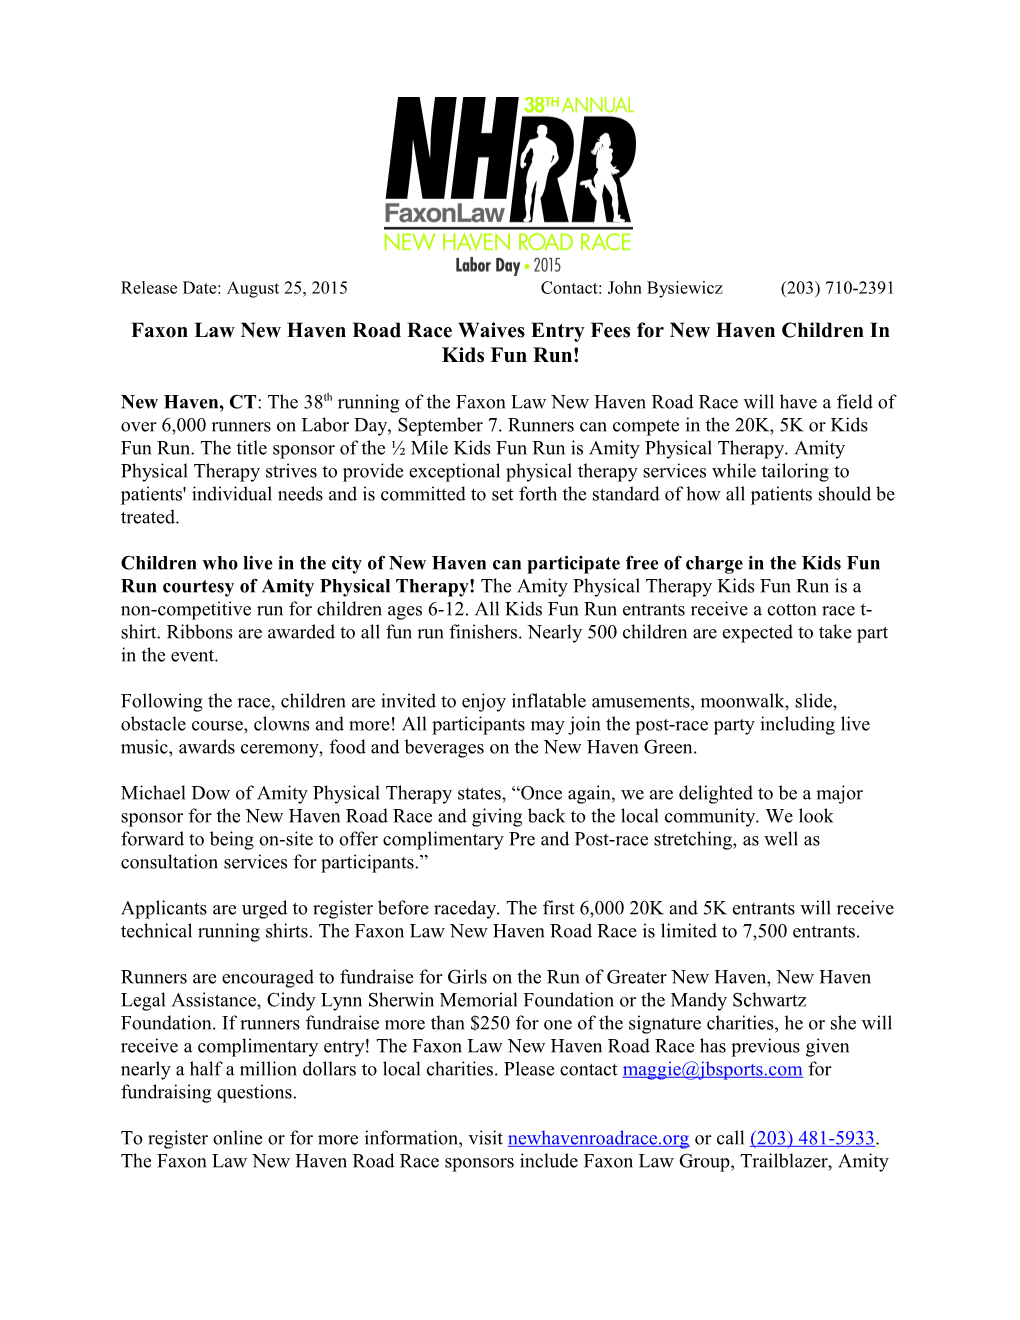 Faxon Law New Haven Road Racewaives Entry Fees for New Haven Children in Kids Fun Run!